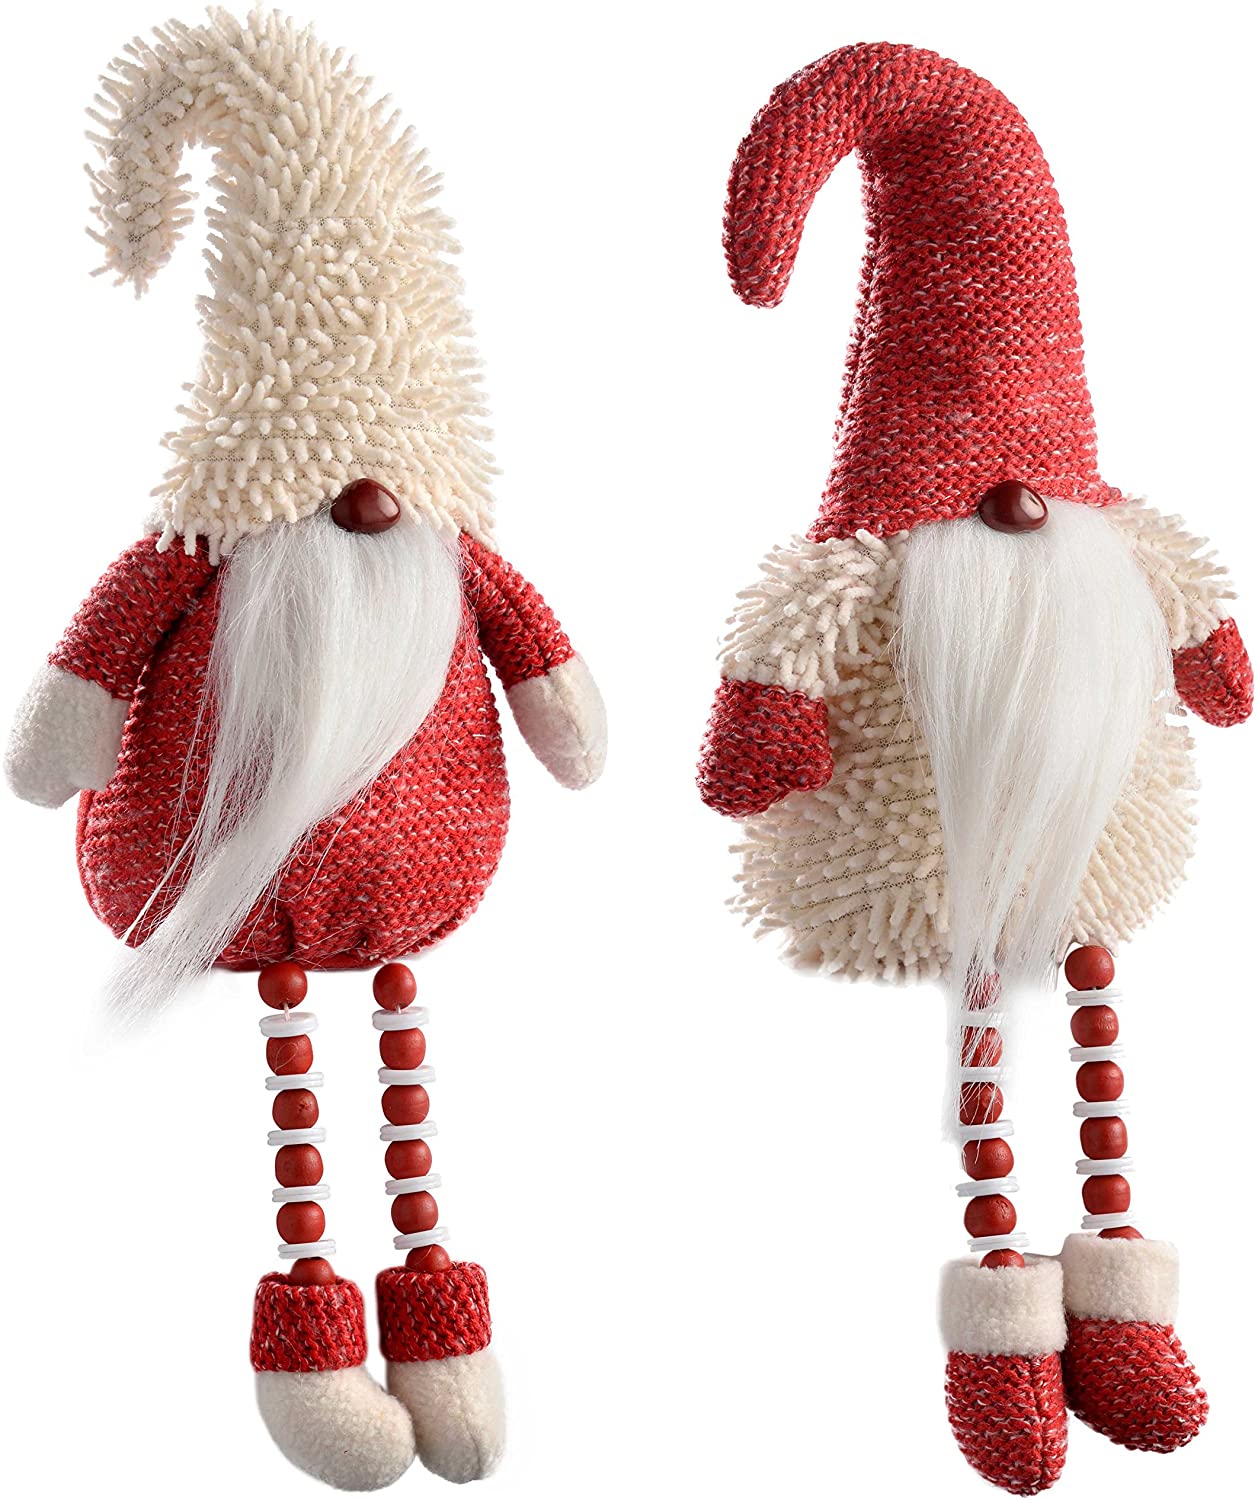 WeRChristmas Sitting Santa Gonks with Bead Legs, Christmas Decoration, 38 cm, Red/White, Pack of 2